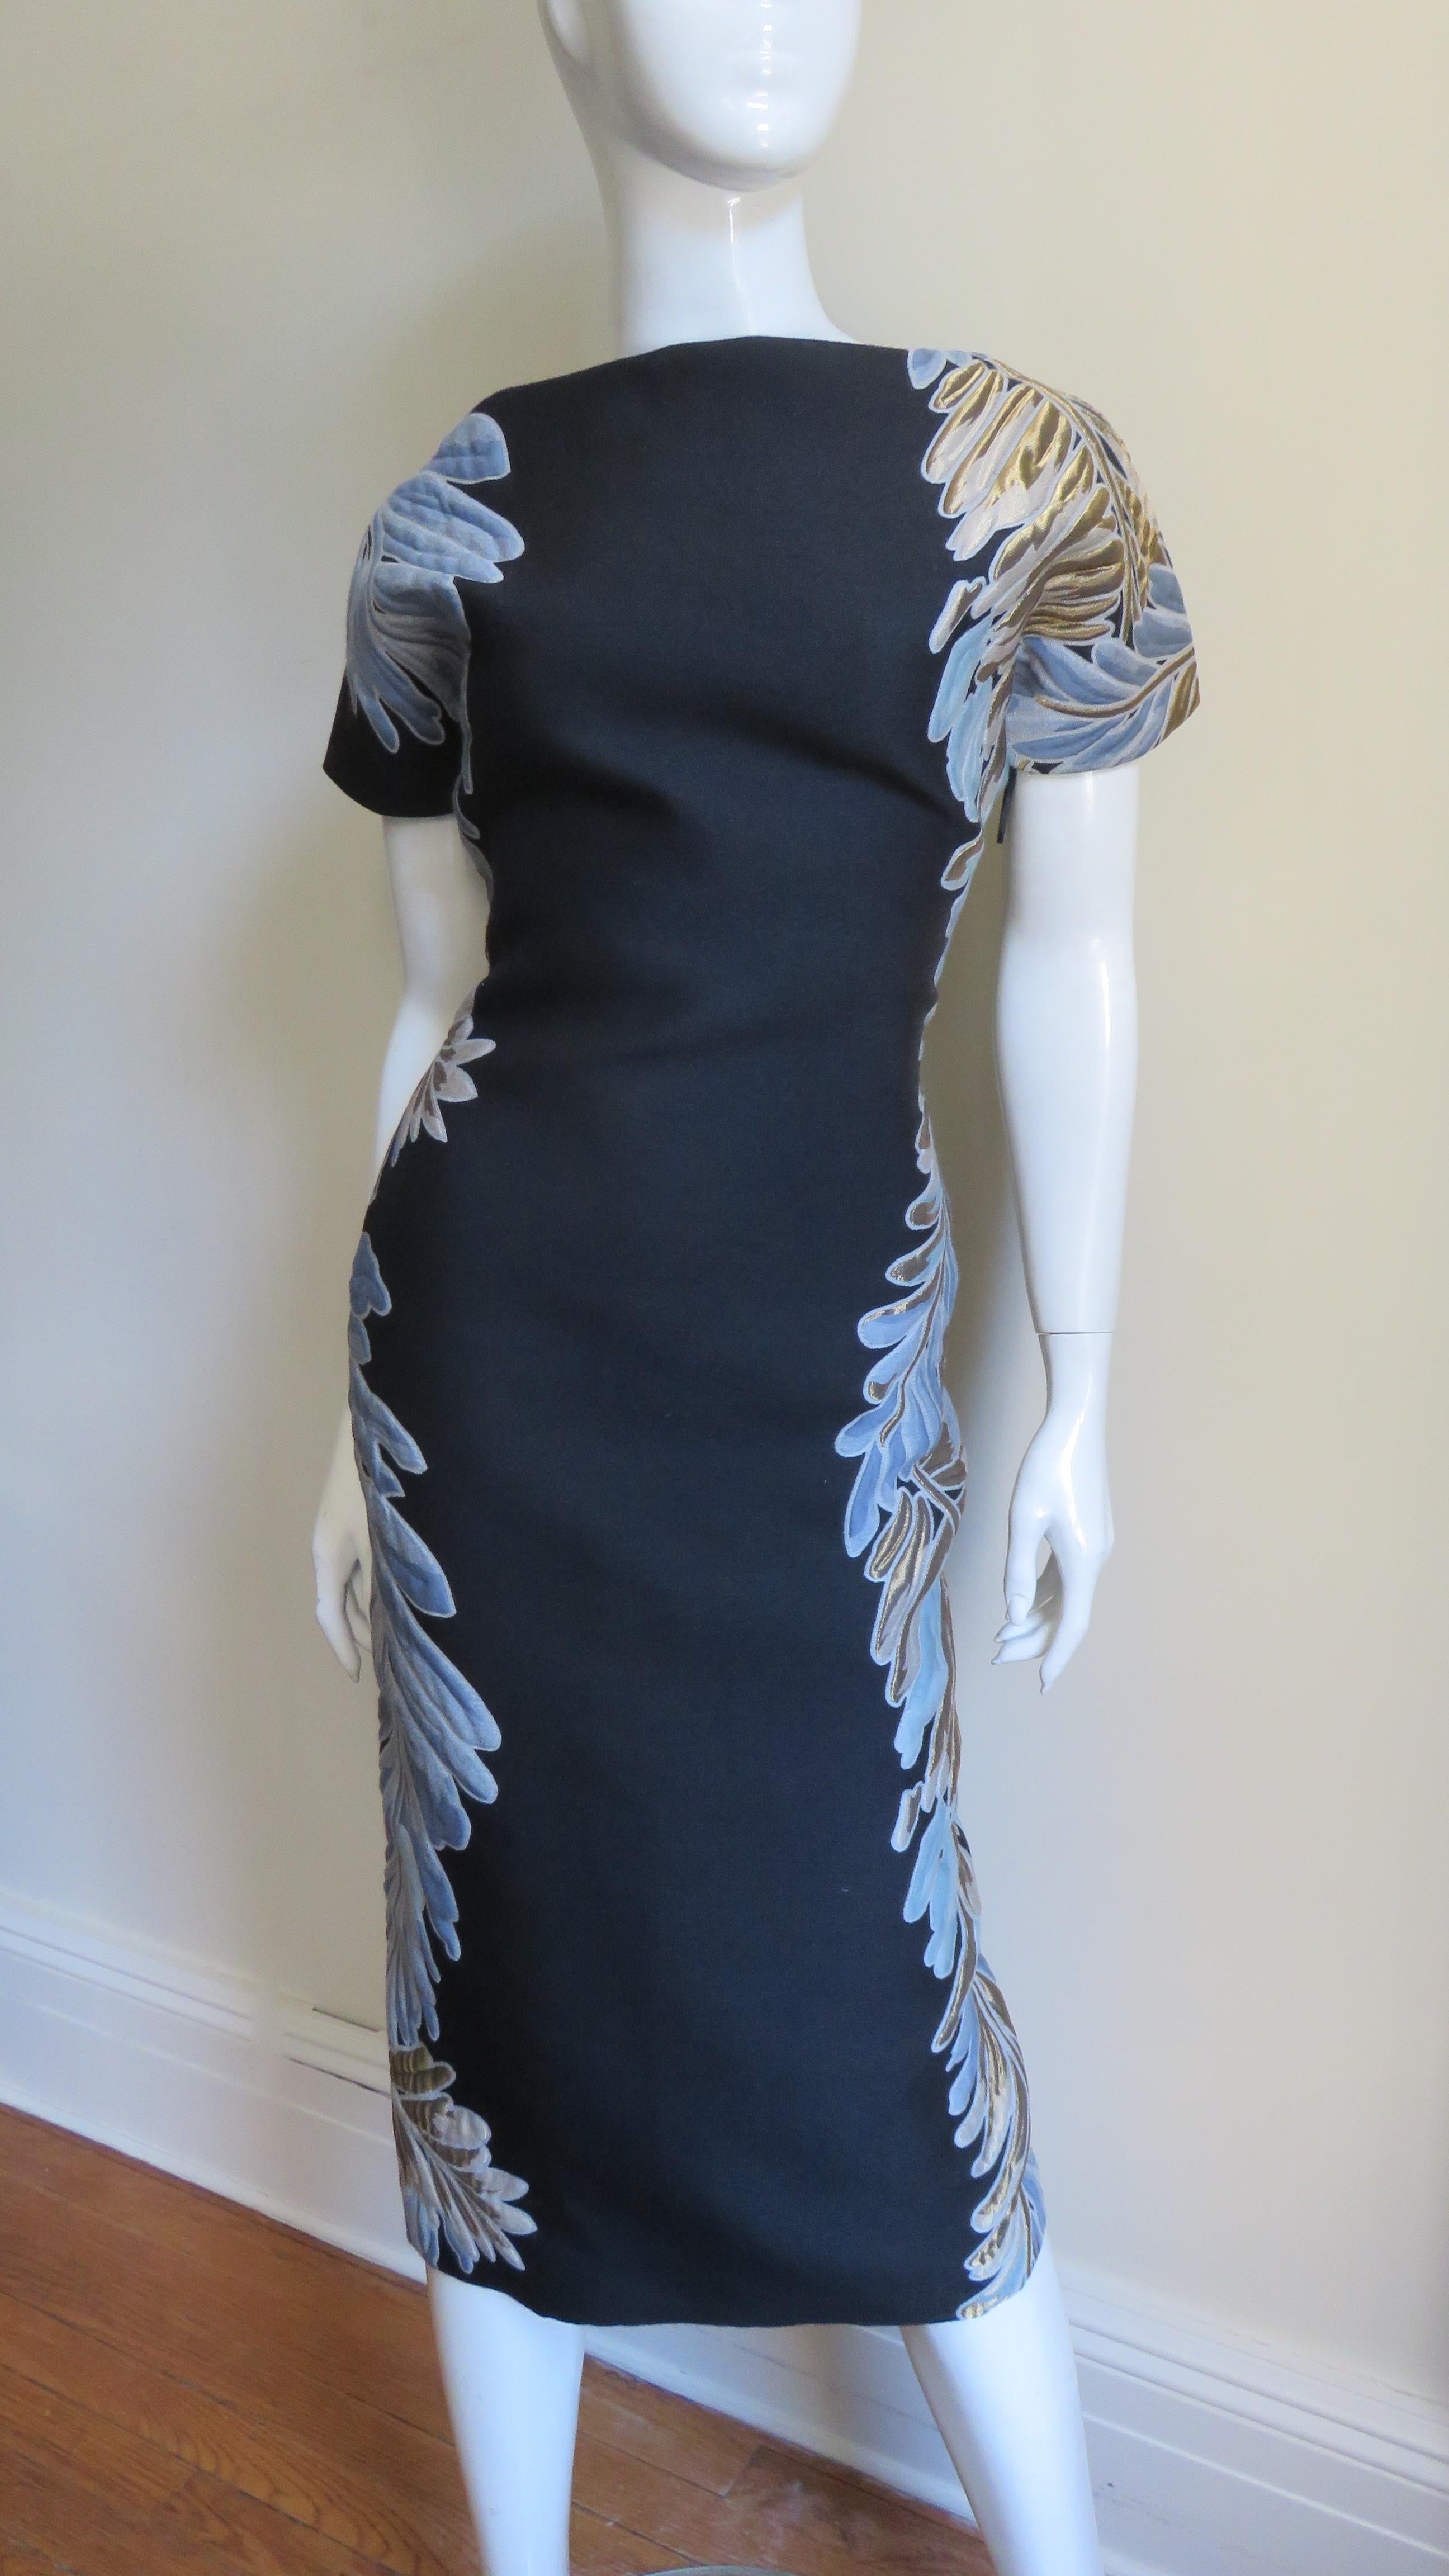 An incredible black silk brocade dress with a blue, beige and gold petal pattern trim strategically and flatteringly placed along the sides and sleeves from Gucci.  It is semi fitted with short sleeves and a fabulous low cut to the waist back. 